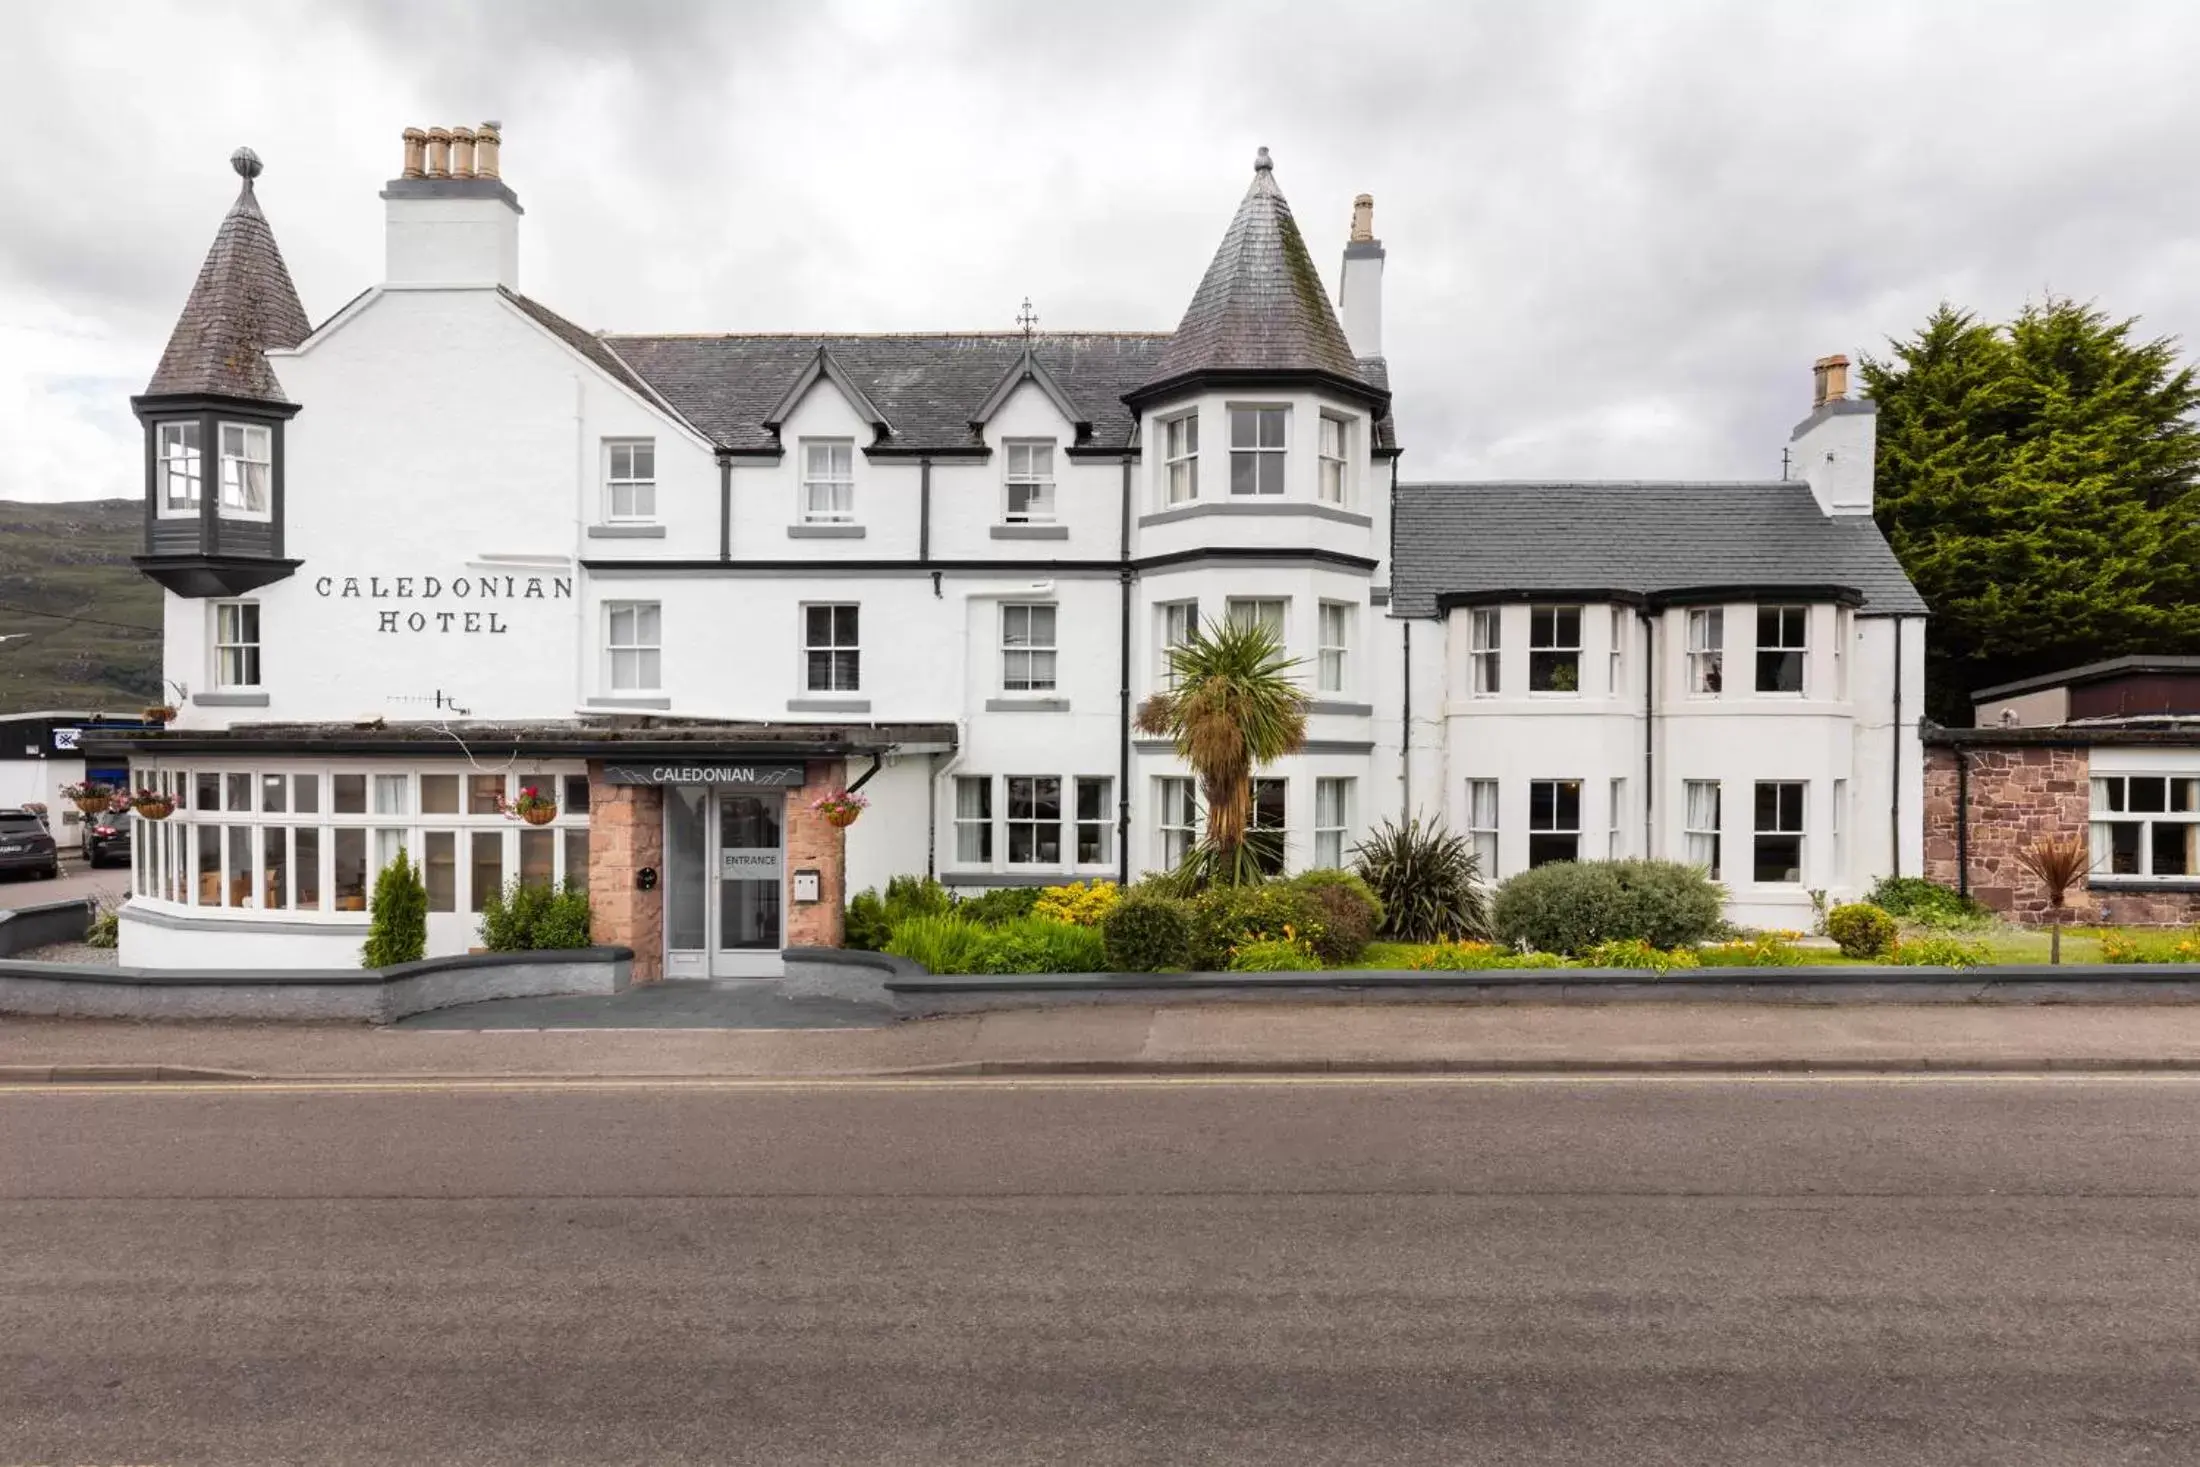 Property Building in Caledonian Hotel 'A Bespoke Hotel’